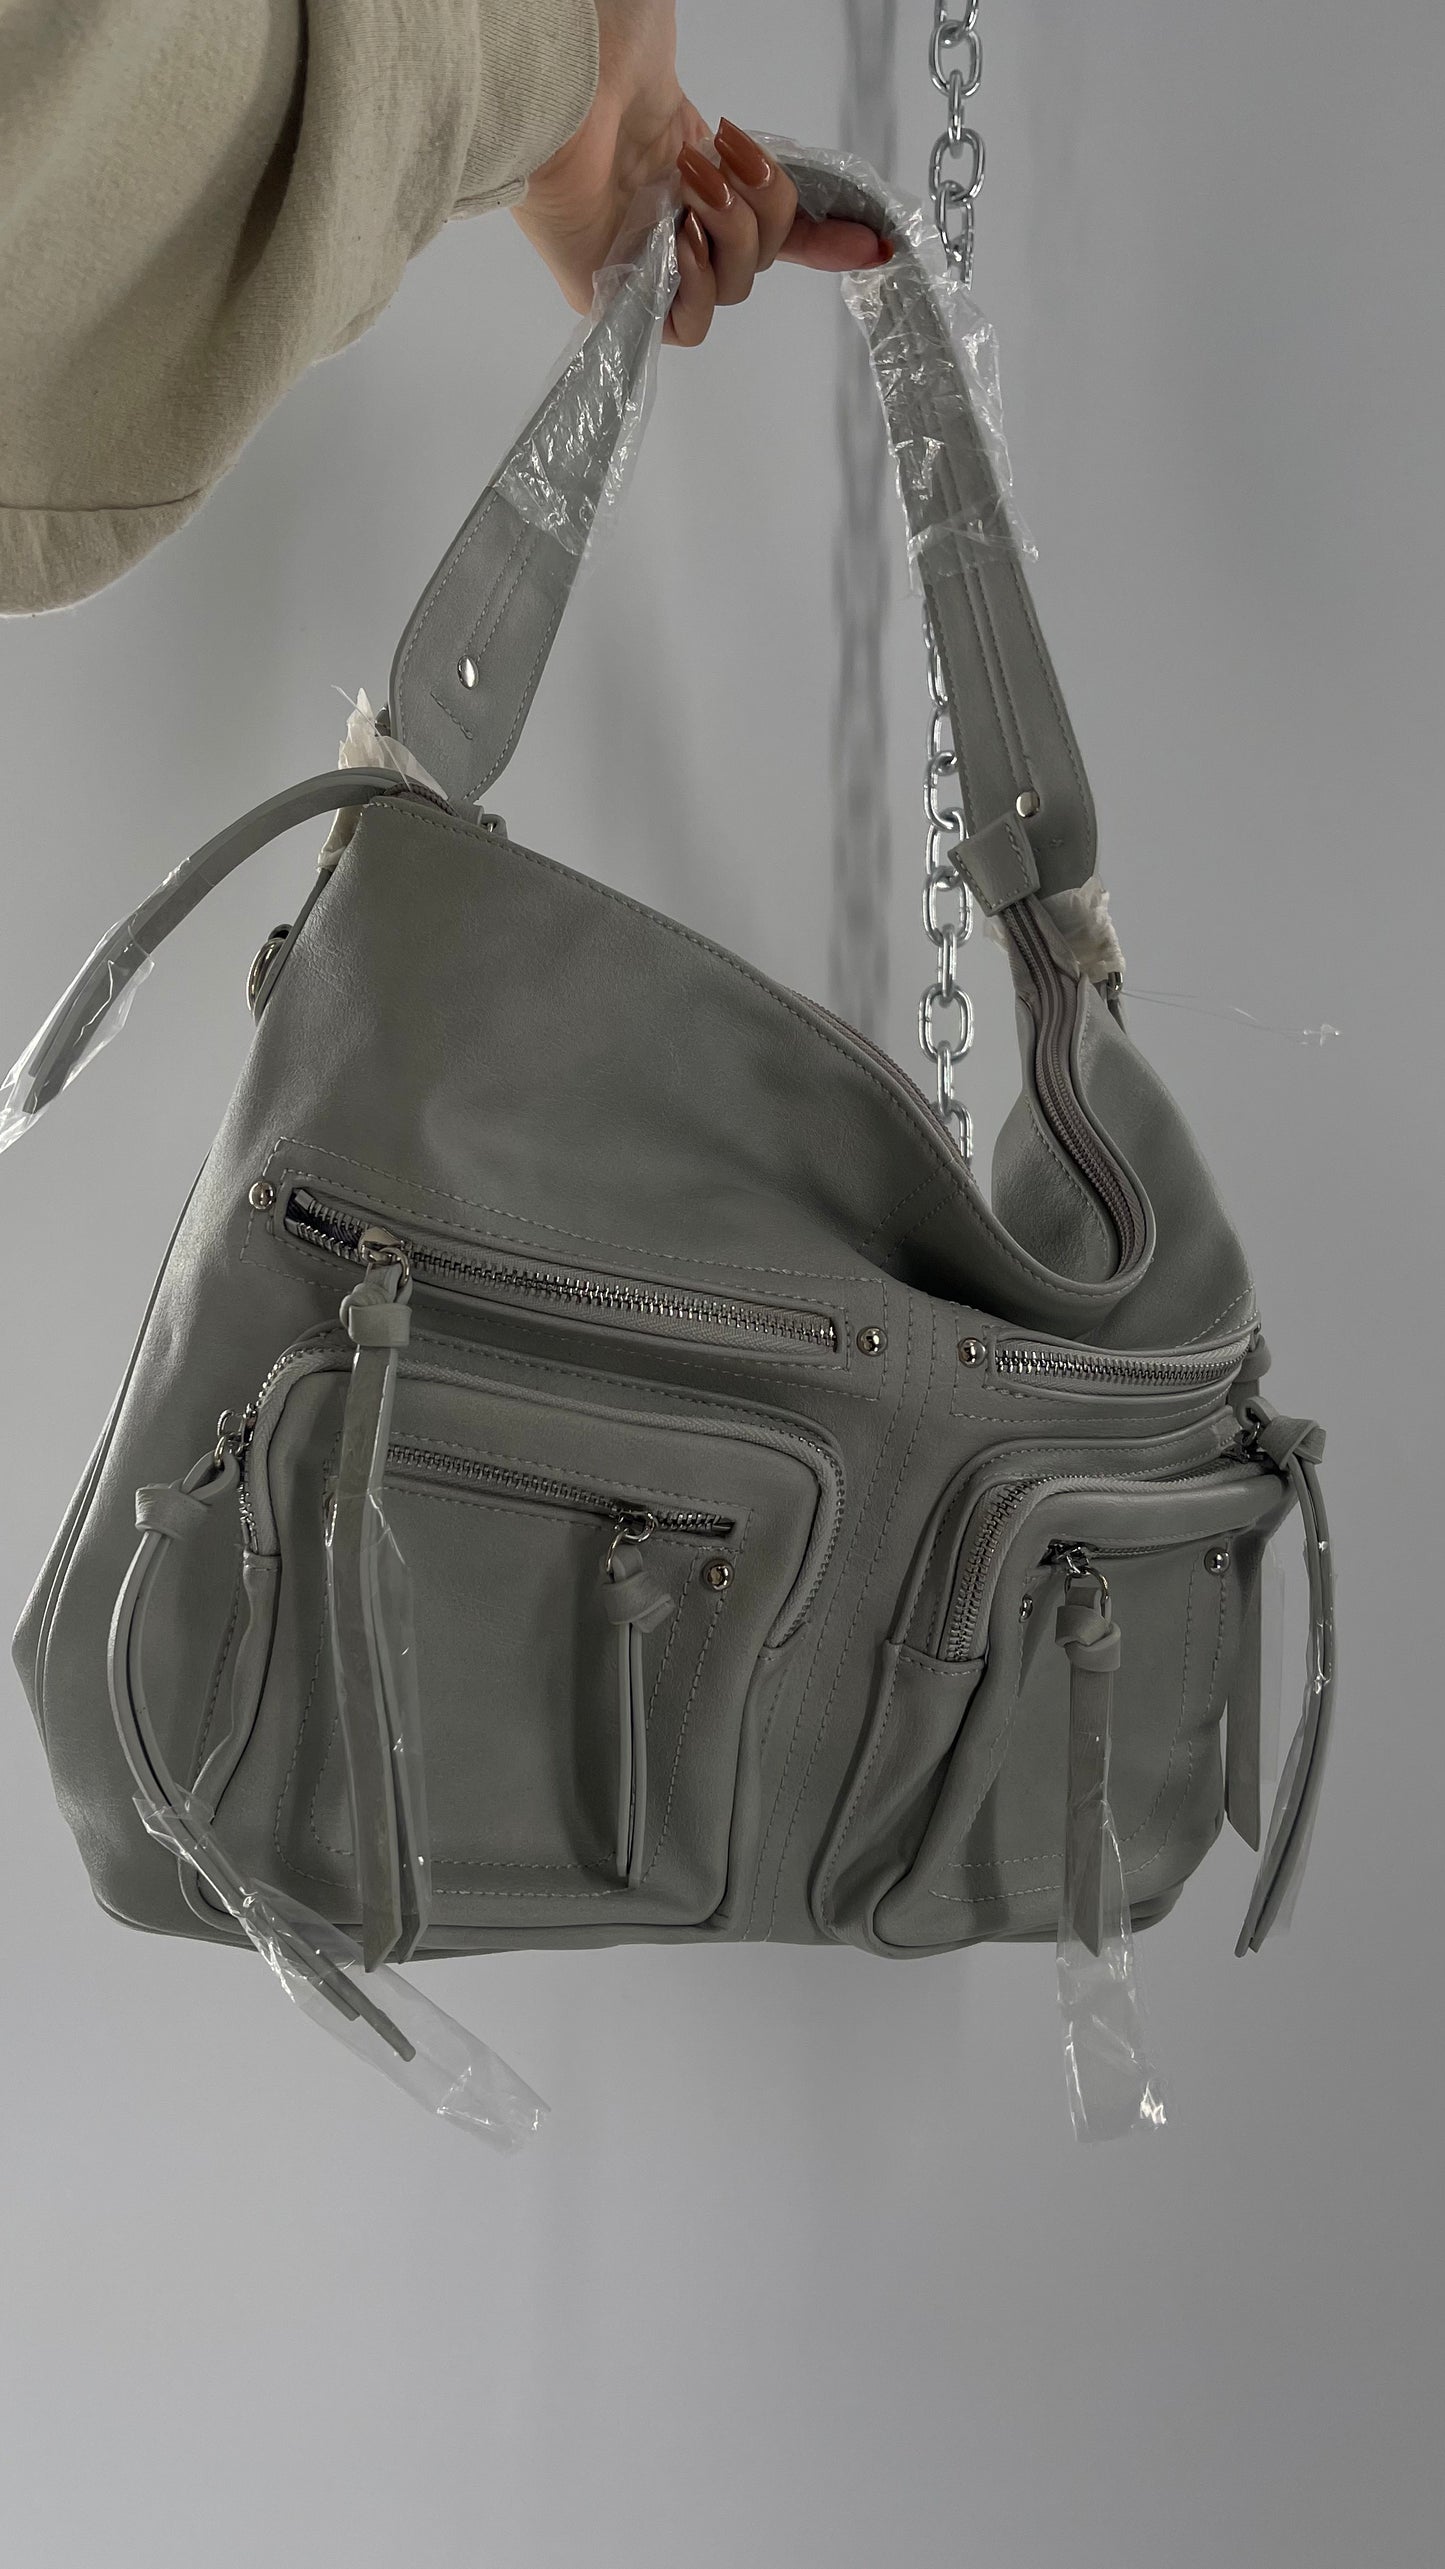 Free People Grey Leather Bag with Heavy Silver Metal Detailing, Pockets and Extra Strap